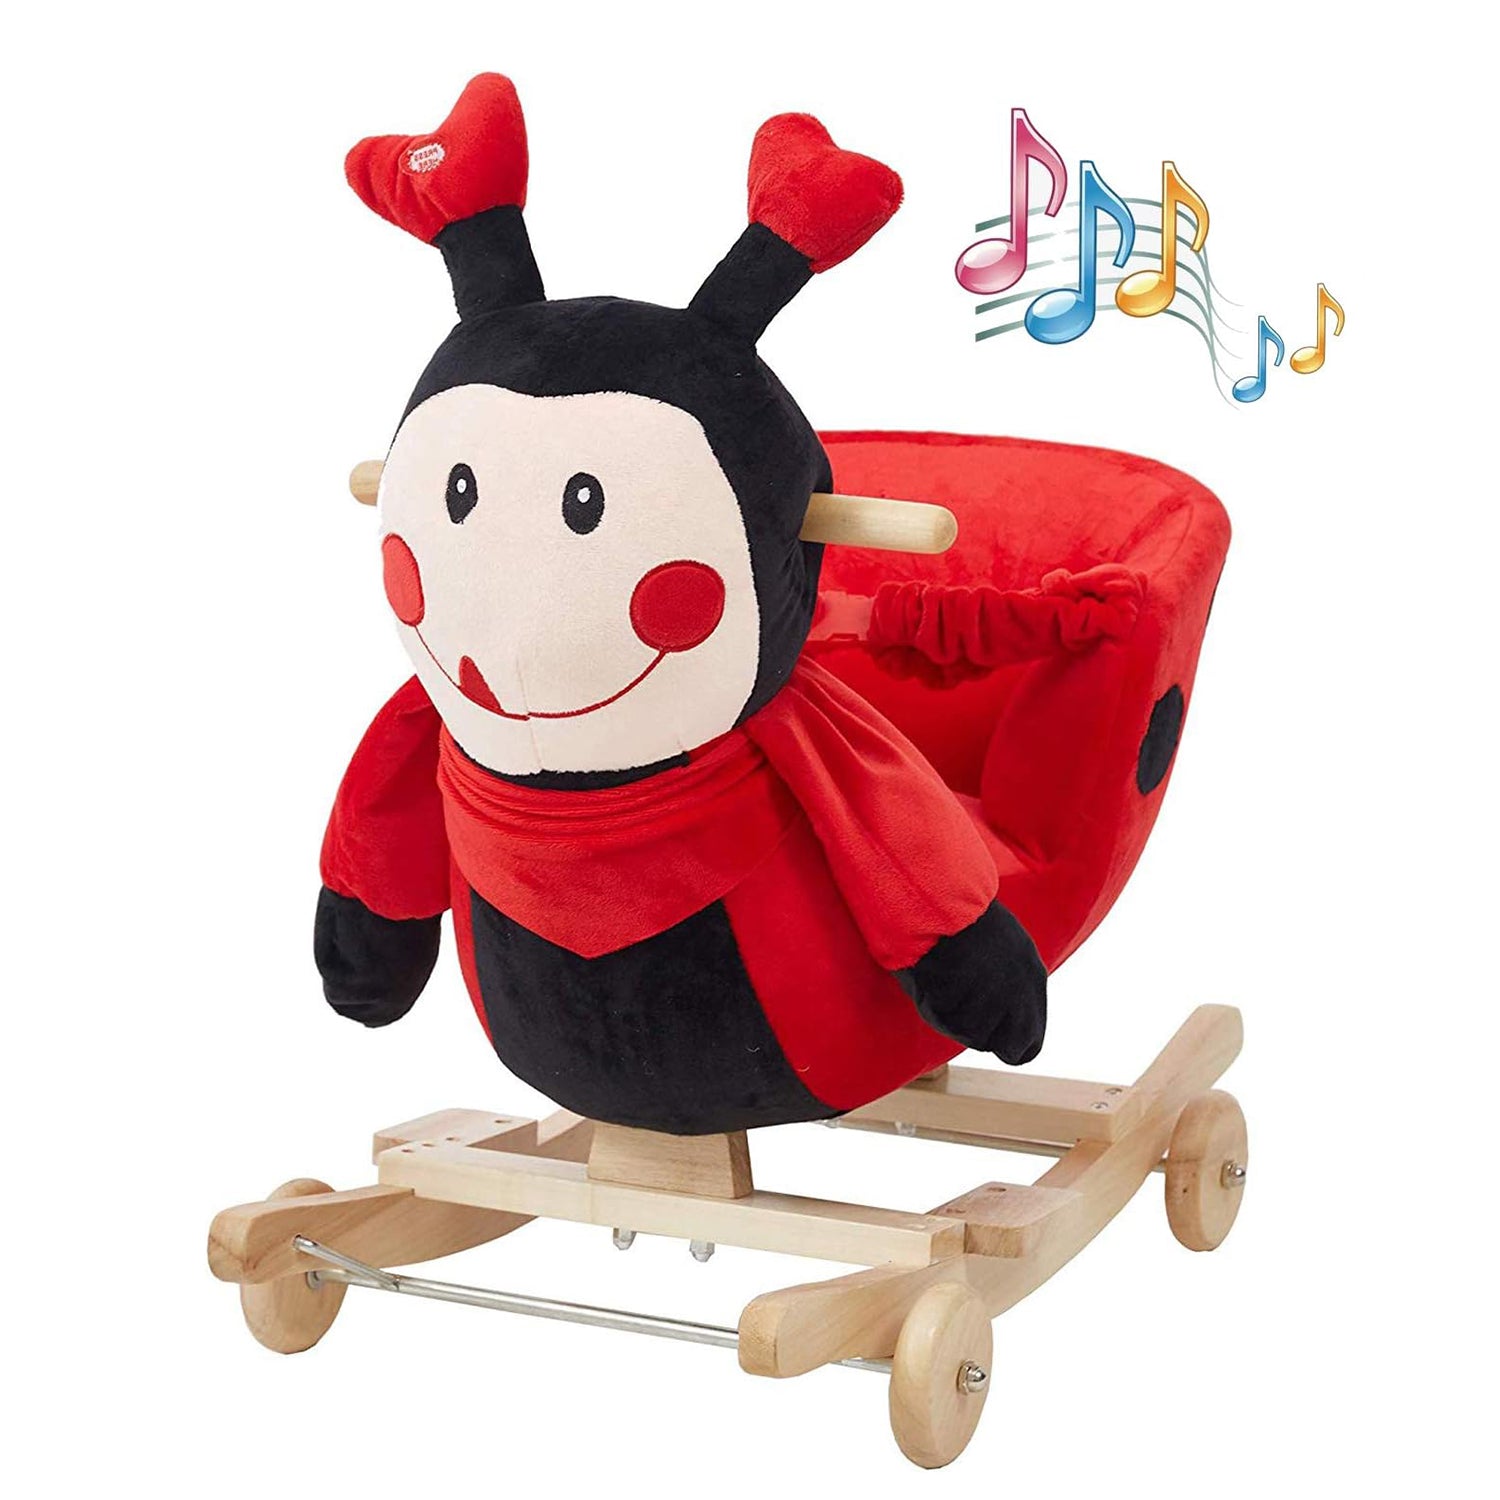 2-in-1 Ride-on Wooden Plush Rocking Horse Chair with Music for Baby Kids Toddlers, Red Ladybug